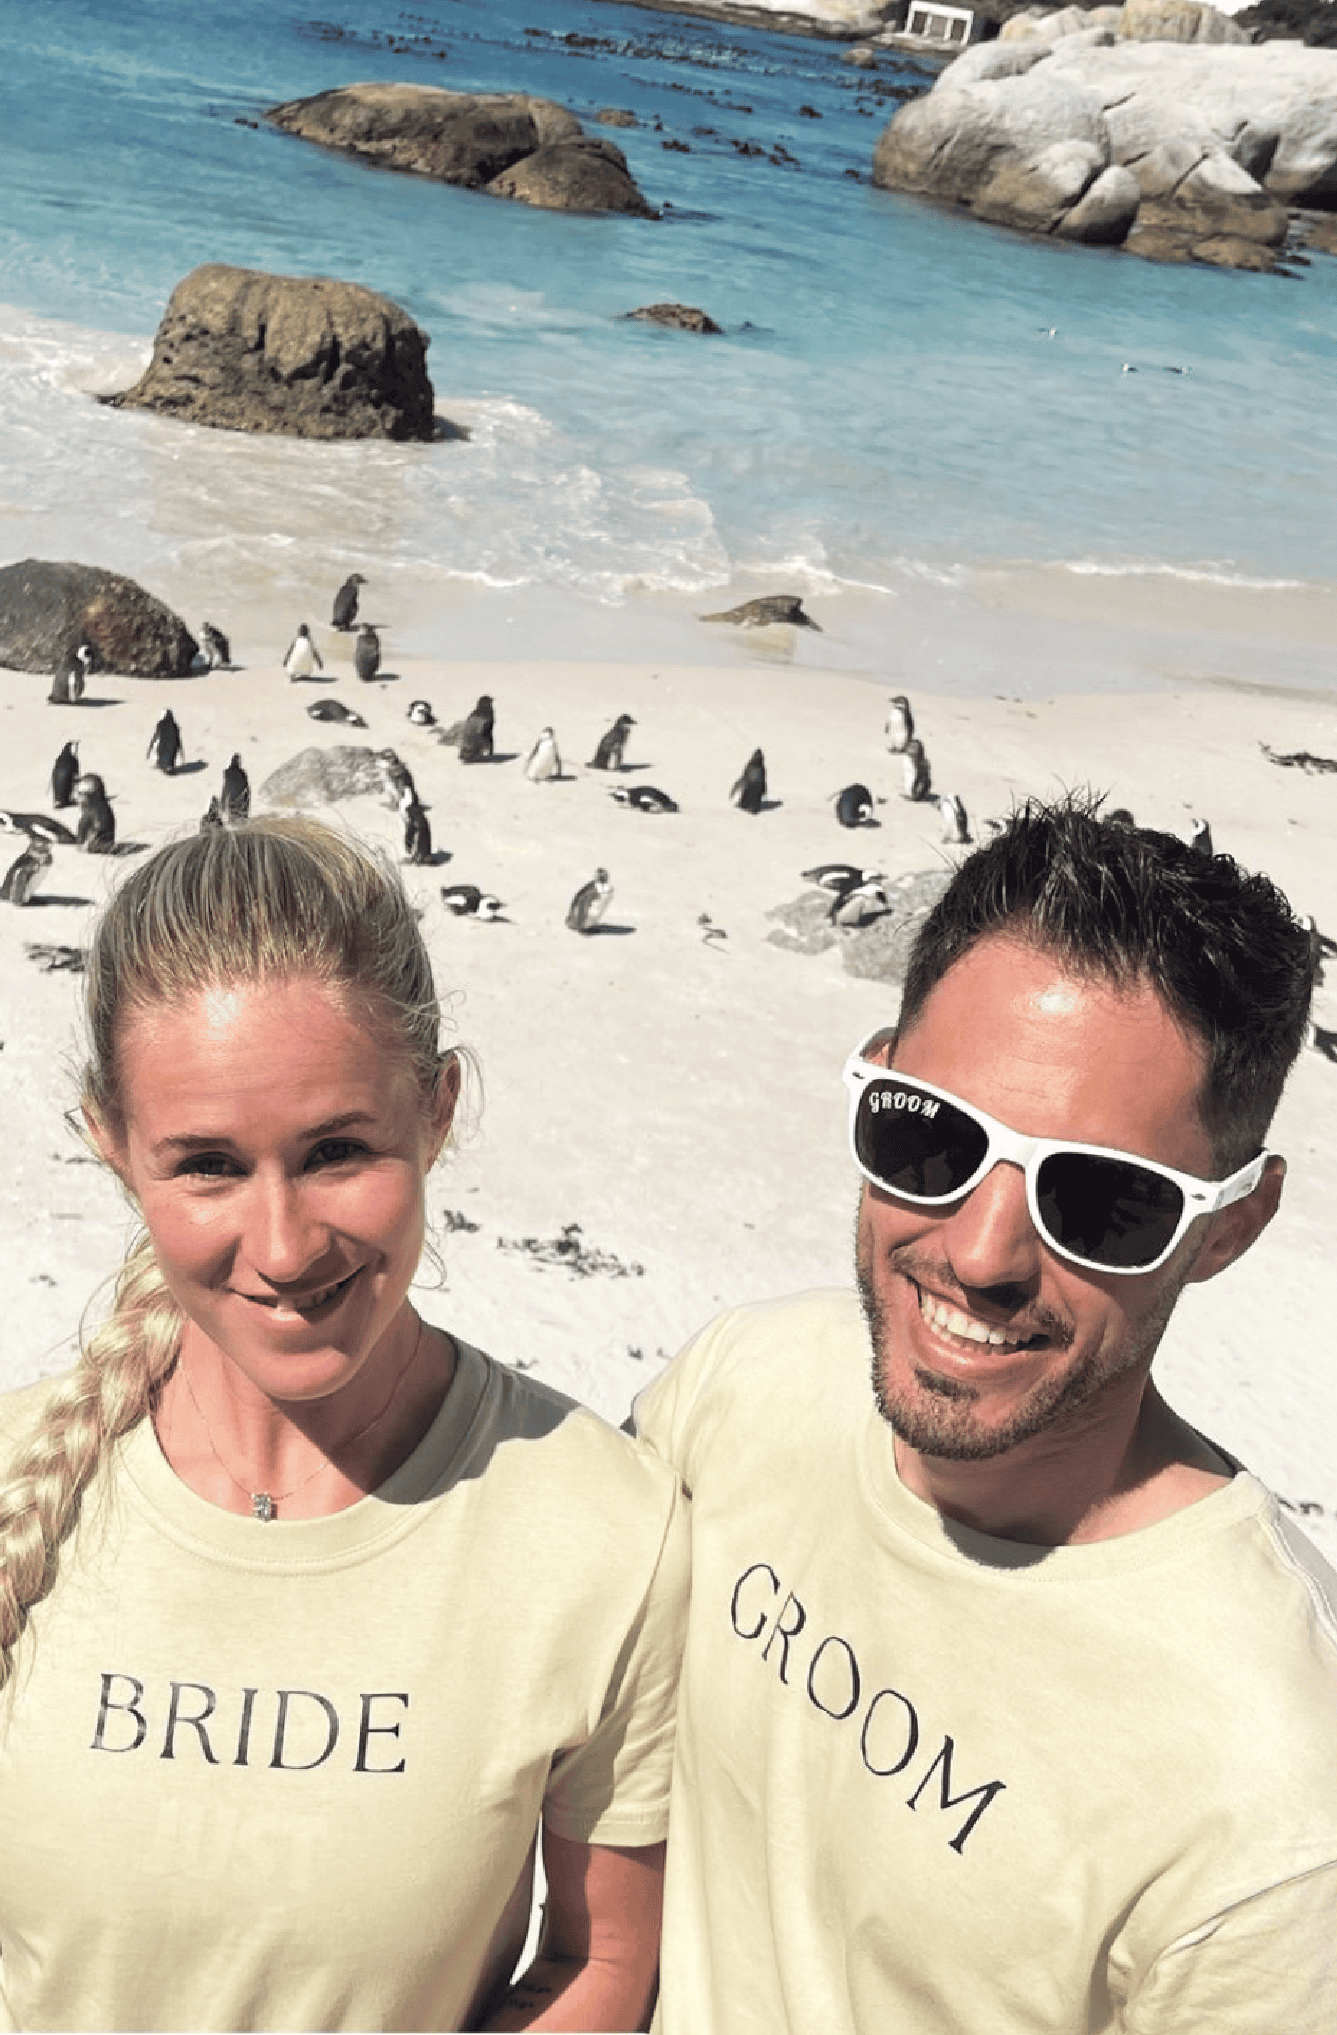 Models wear Bride and Groom T-shirts in a khaki colour while on the beach with penguins